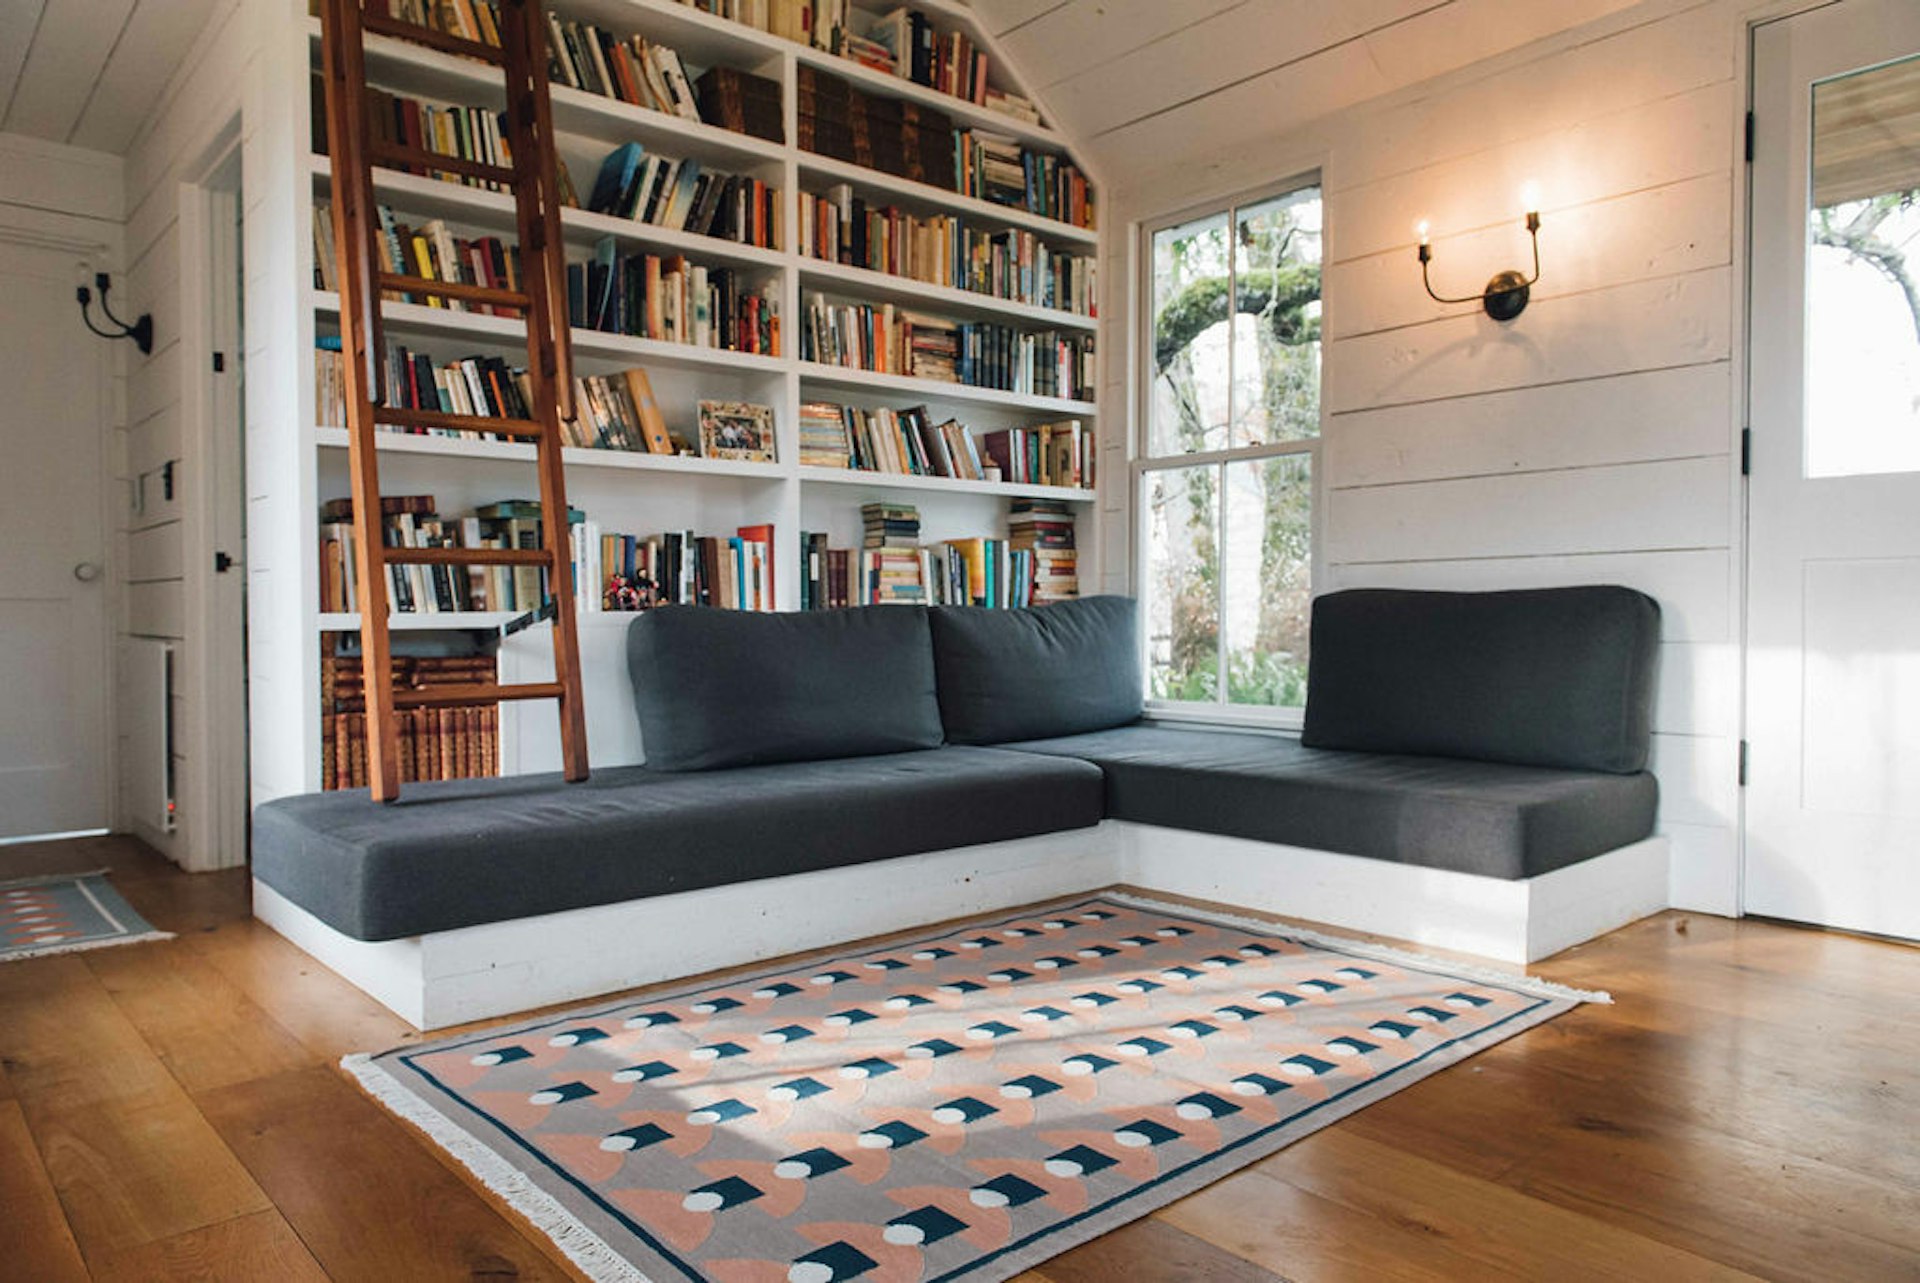 Bloom & Give Tushar dhurrie rug in front of a sofa and bookshelves